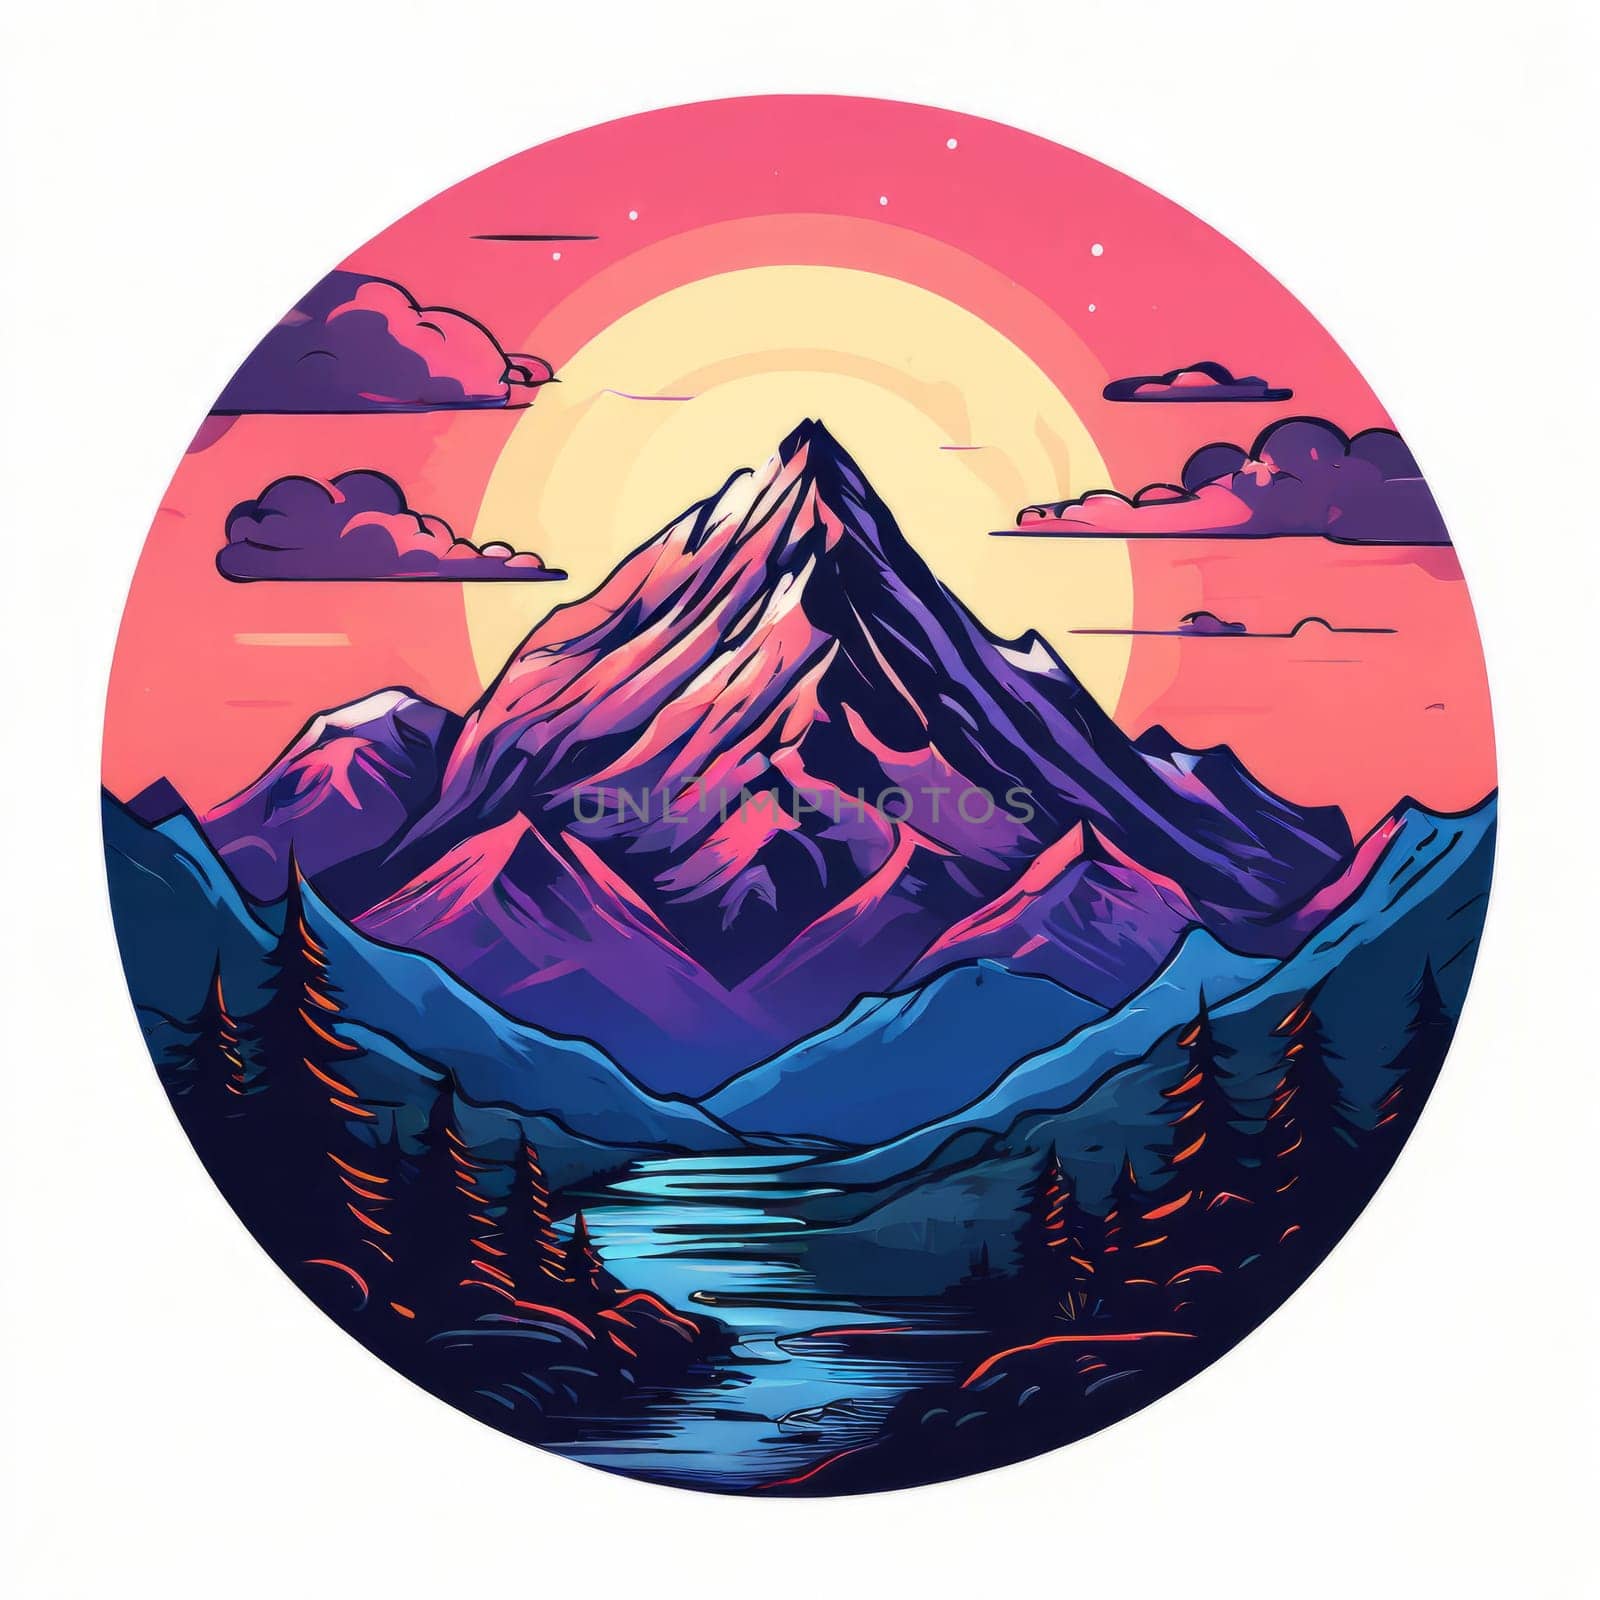 Serene illustration of mountains, river enclosed within circular frame, depicting natural beauty, tranquility. Printed on merchandise like tshirts, mugs, notebooks for nature lovers, travel brochures